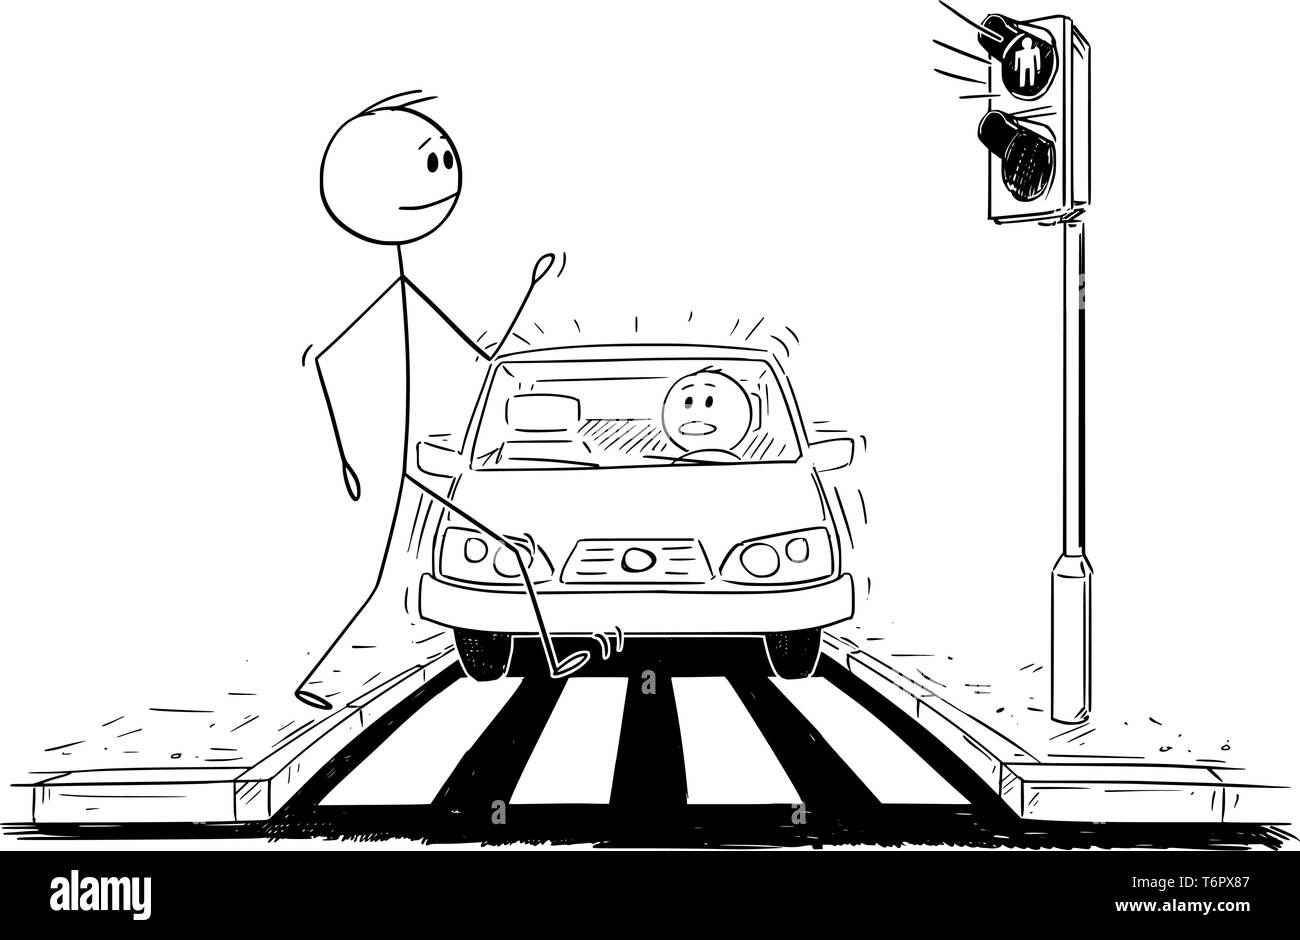 Cartoon stick figure drawing conceptual illustration of man walking on crosswalk or pedestrian crossing ignoring that red light is on on stoplights and car is getting closer. Stock Vector